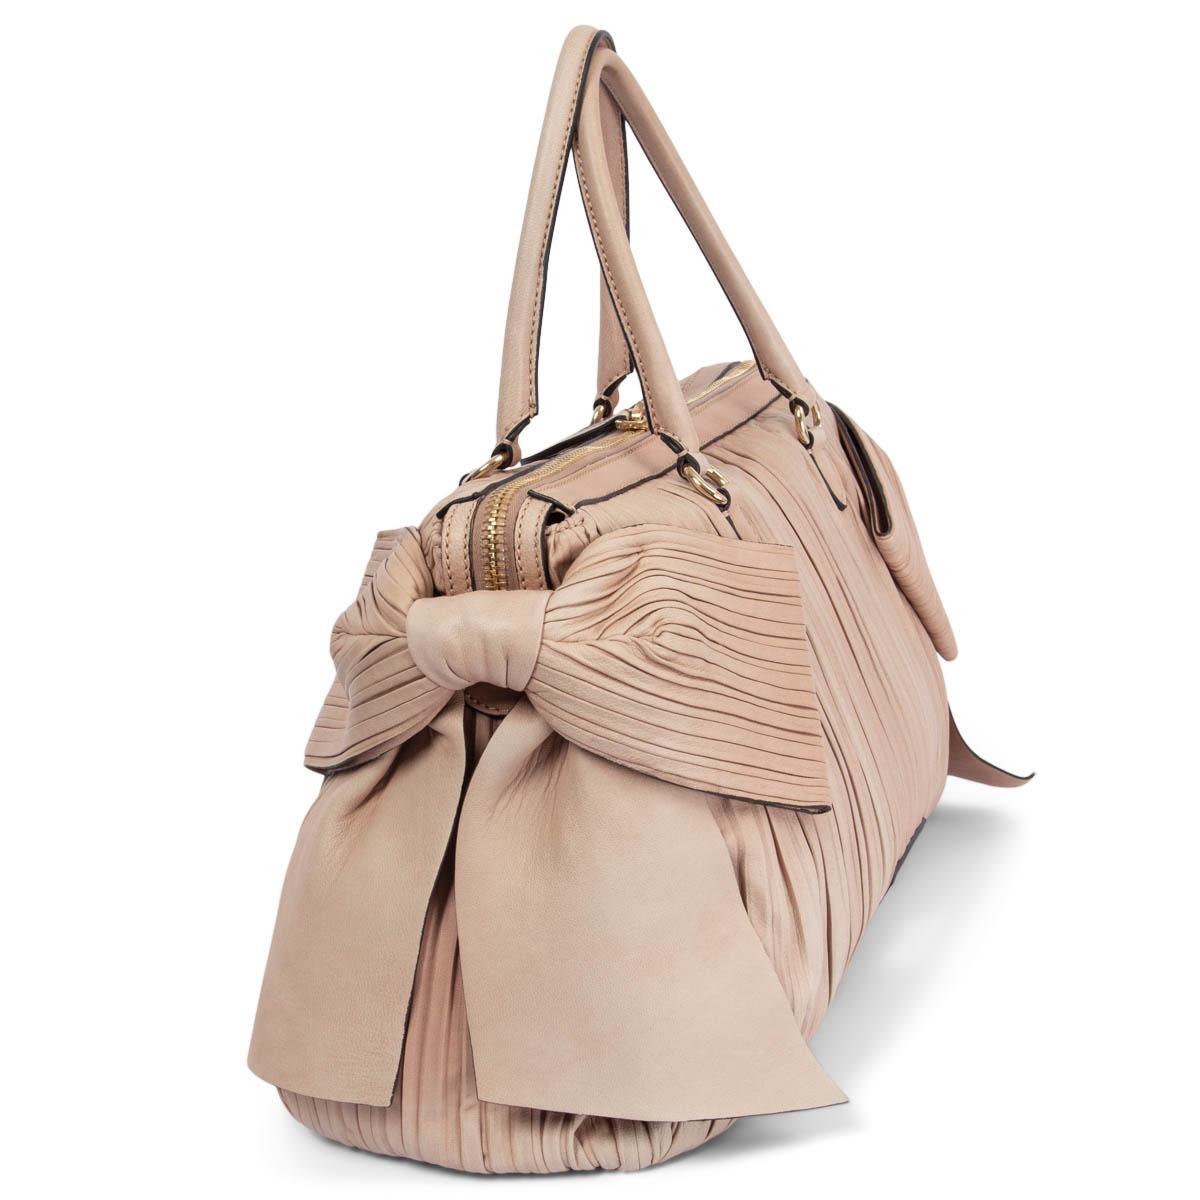 100% authentic Valentino Garavani pleated and side bow embellished handbag in nude soft calfskin. Opens with a double zipper on top and is lined in beige canvas with one zip pocket against the back and two open pockets against the front. Has been